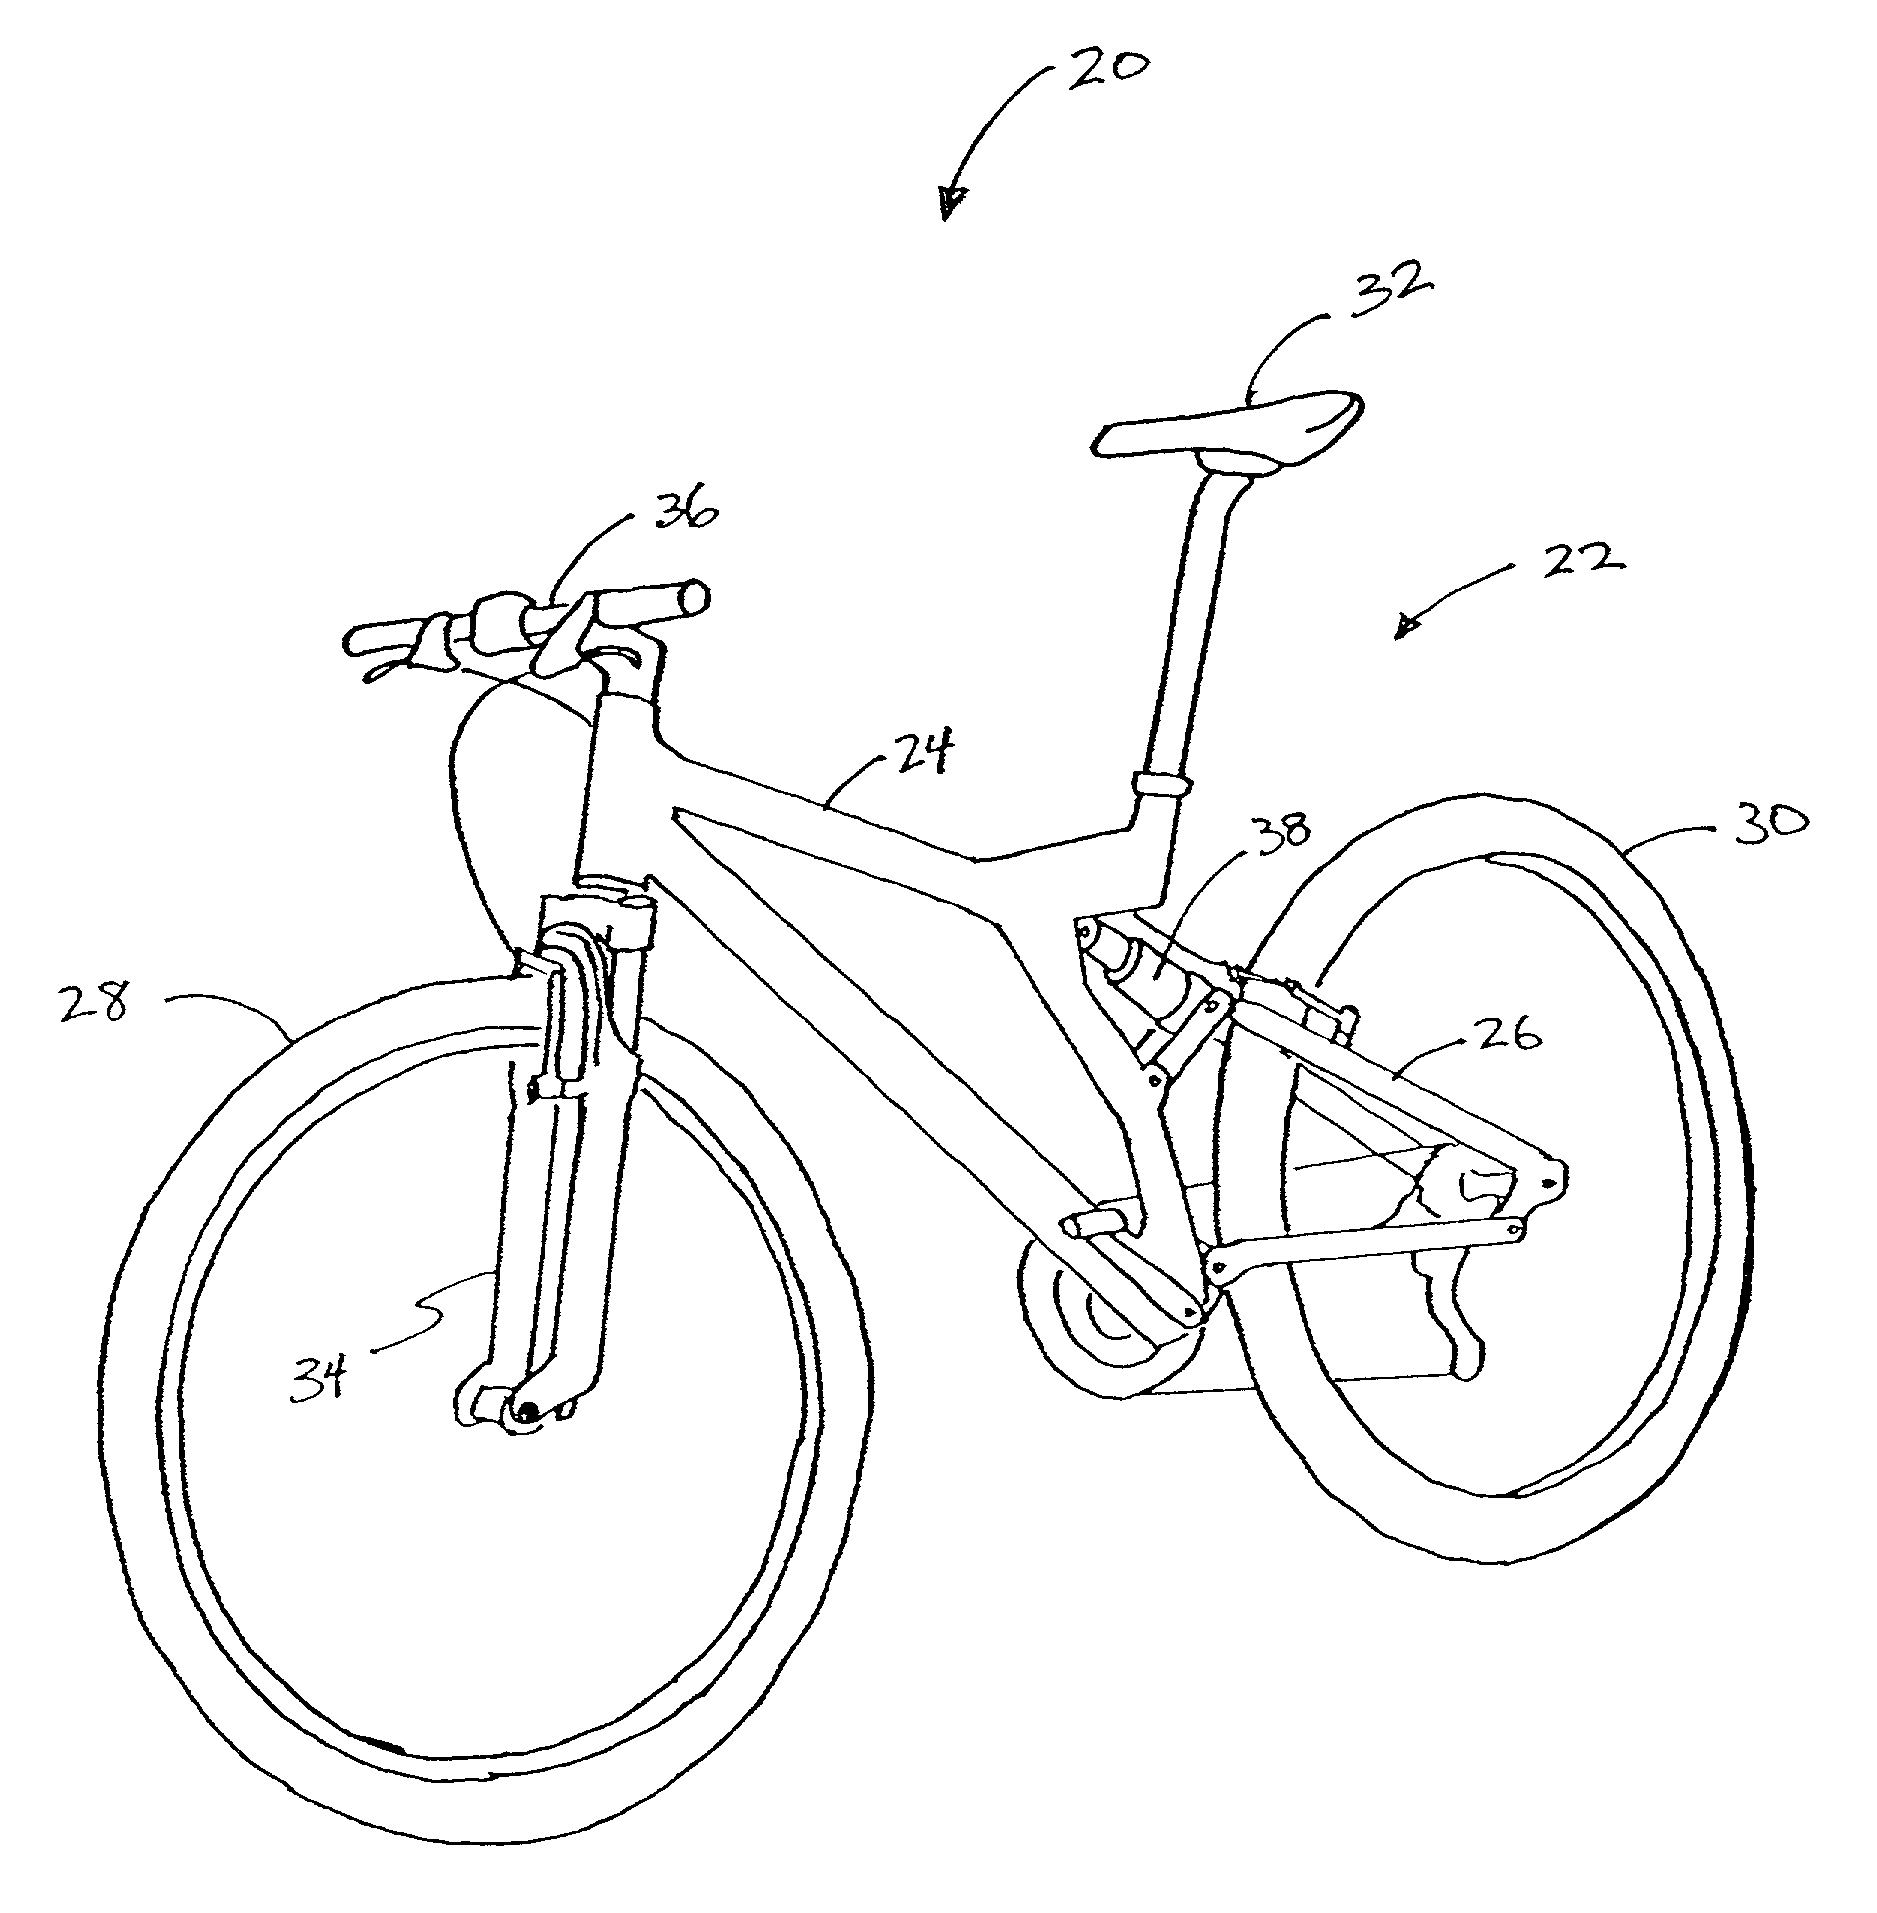 Bicycle fork cartridge assembly